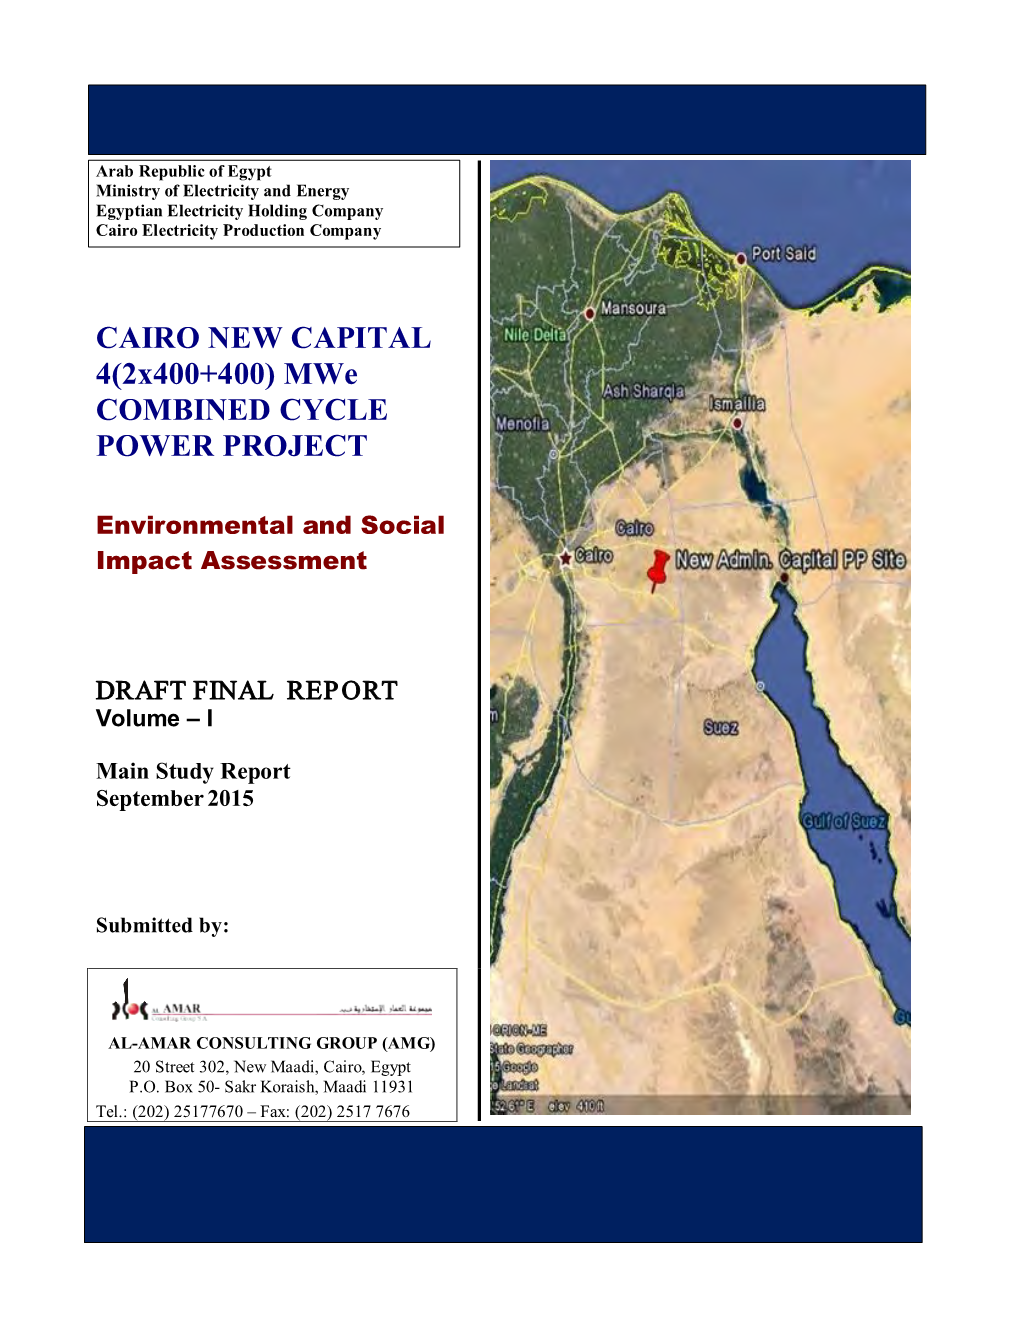 CAIRO NEW CAPITAL 4(2X400+400) Mwe COMBINED CYCLE POWER PROJECT